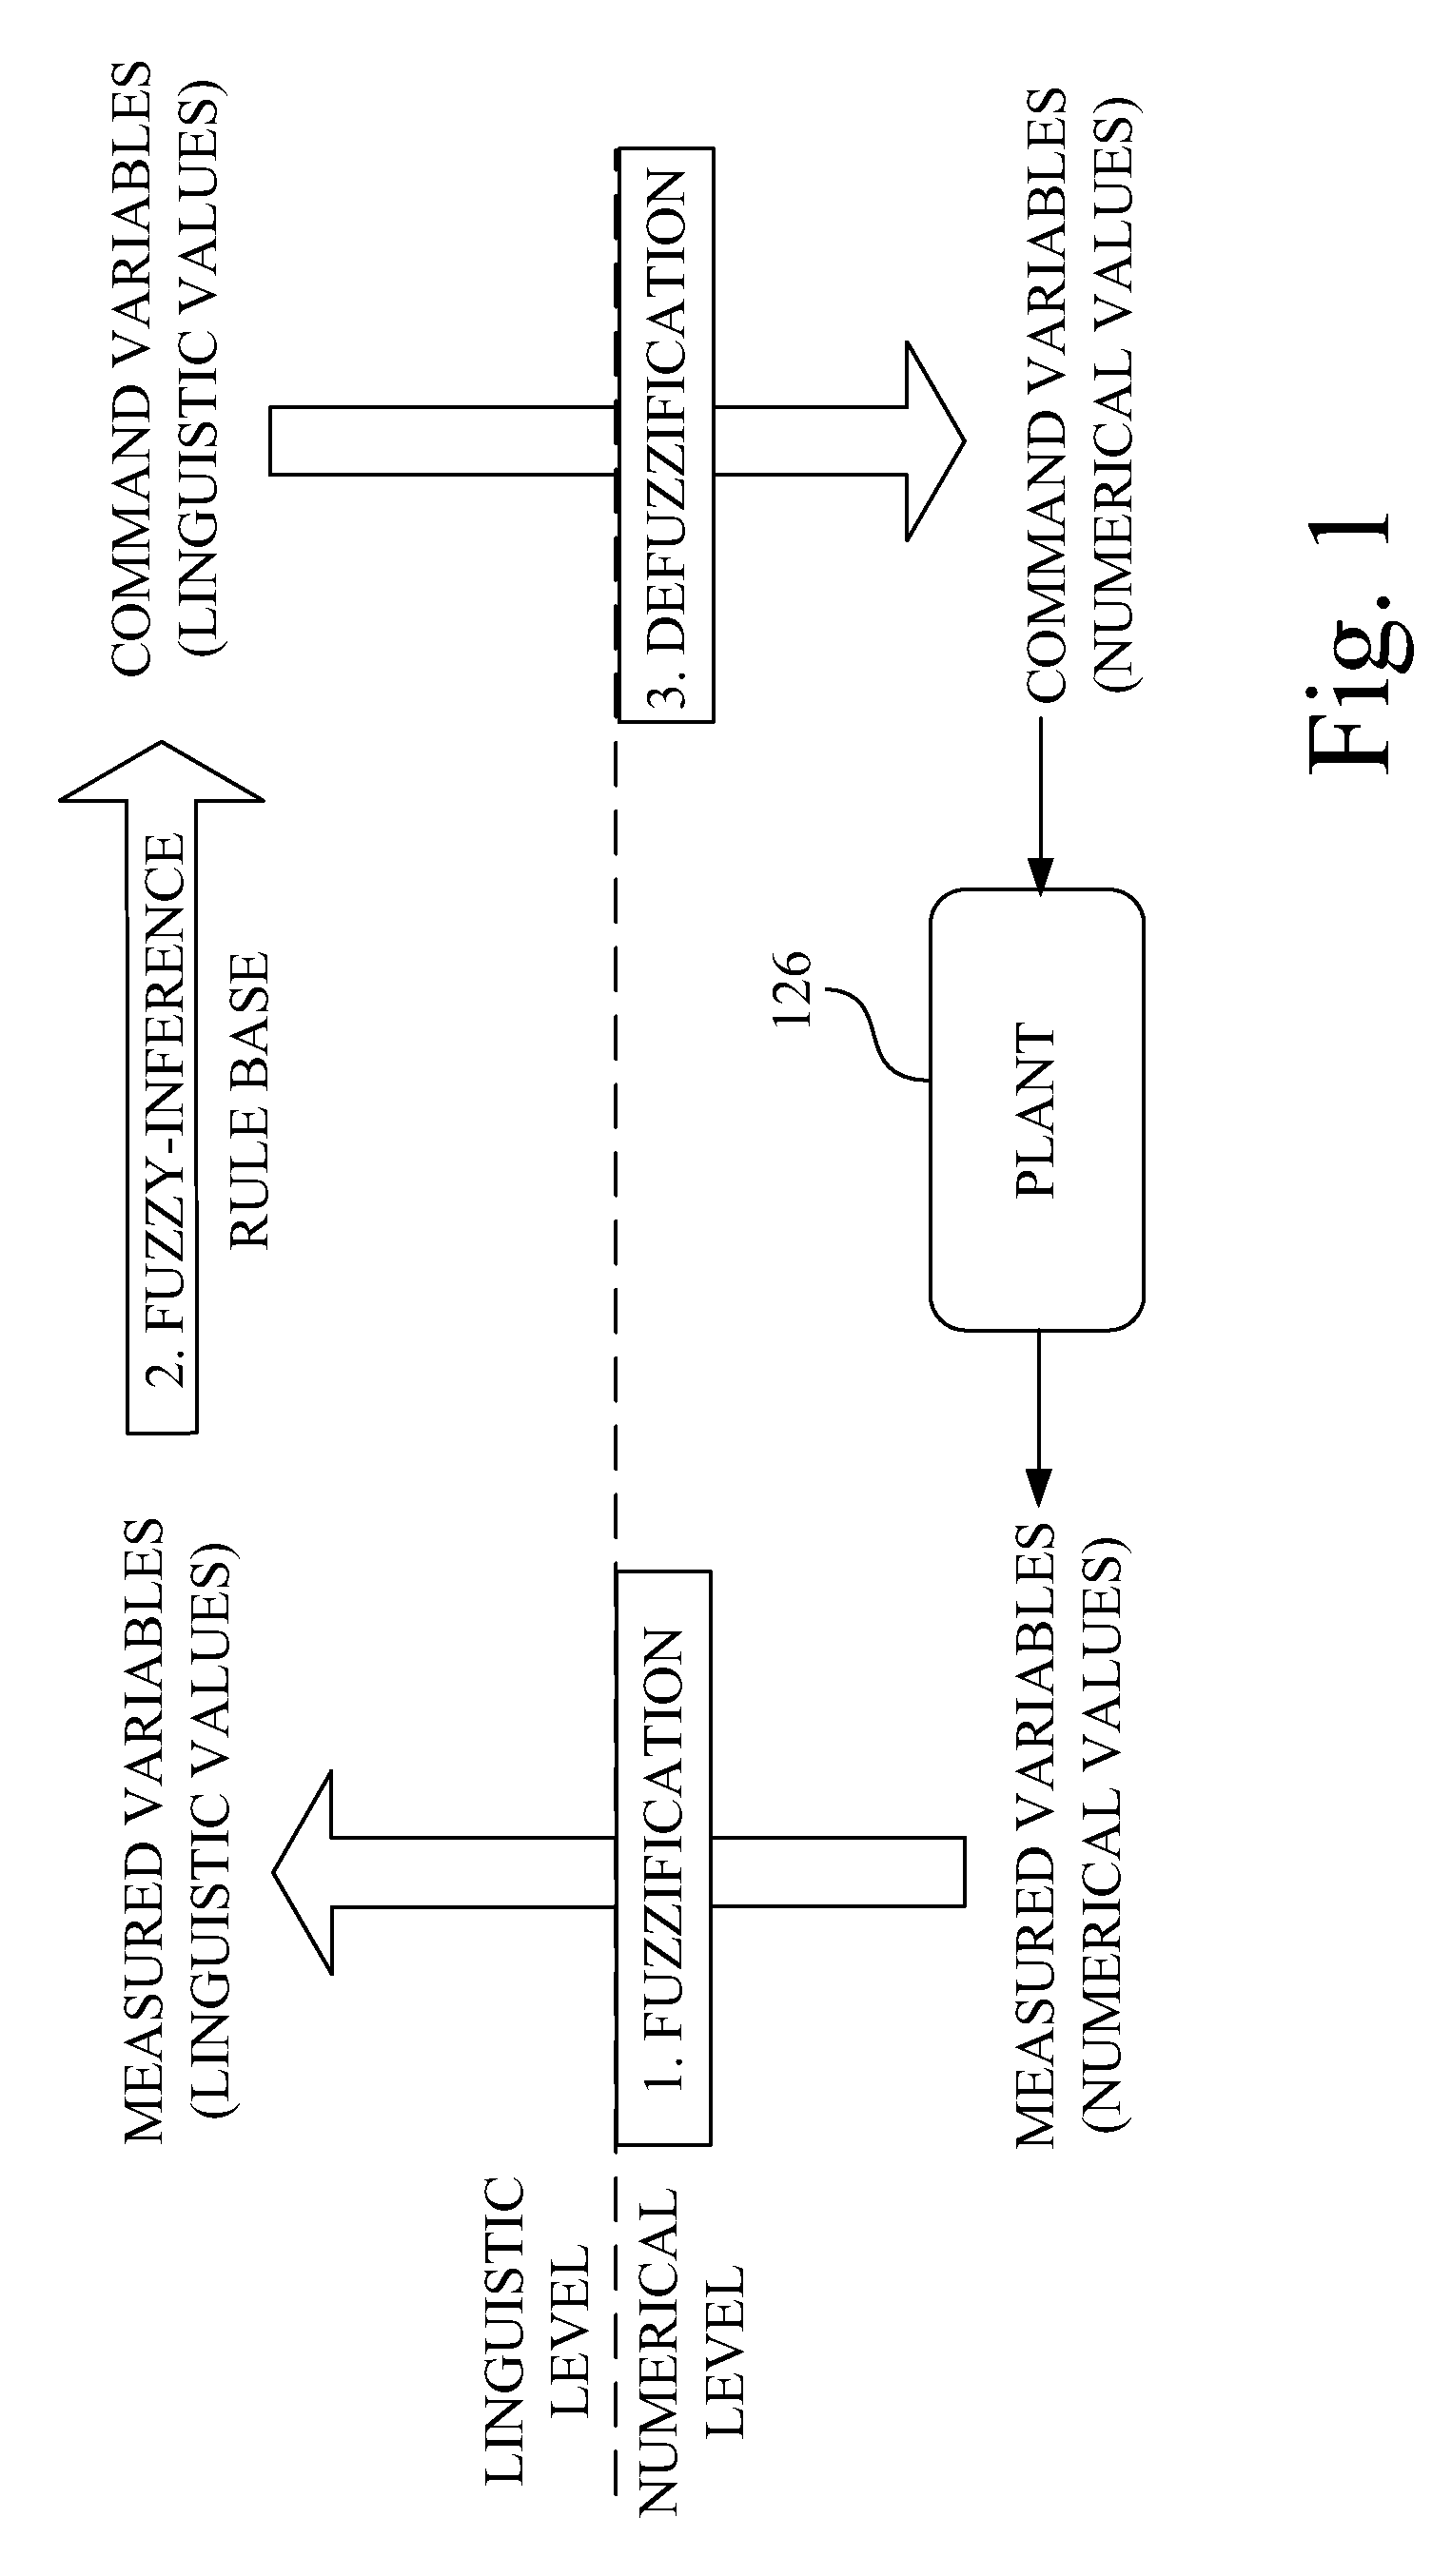 Vehicle steering control method and performance